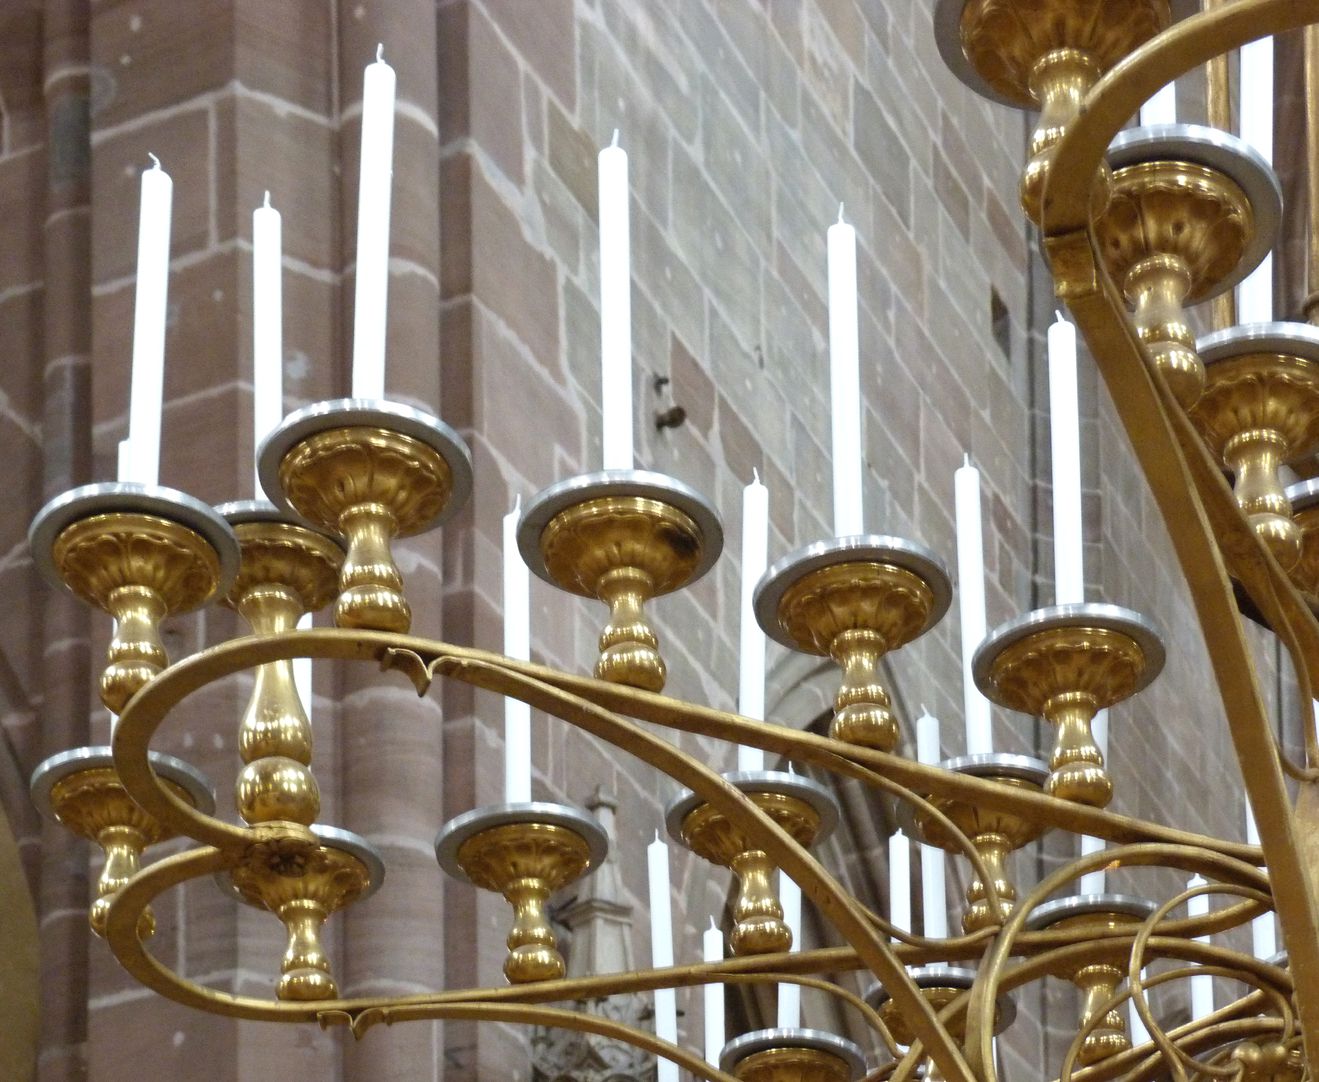 St. Mary´s chandelier View of one heart-shaped “bow” with 11 candlesticks